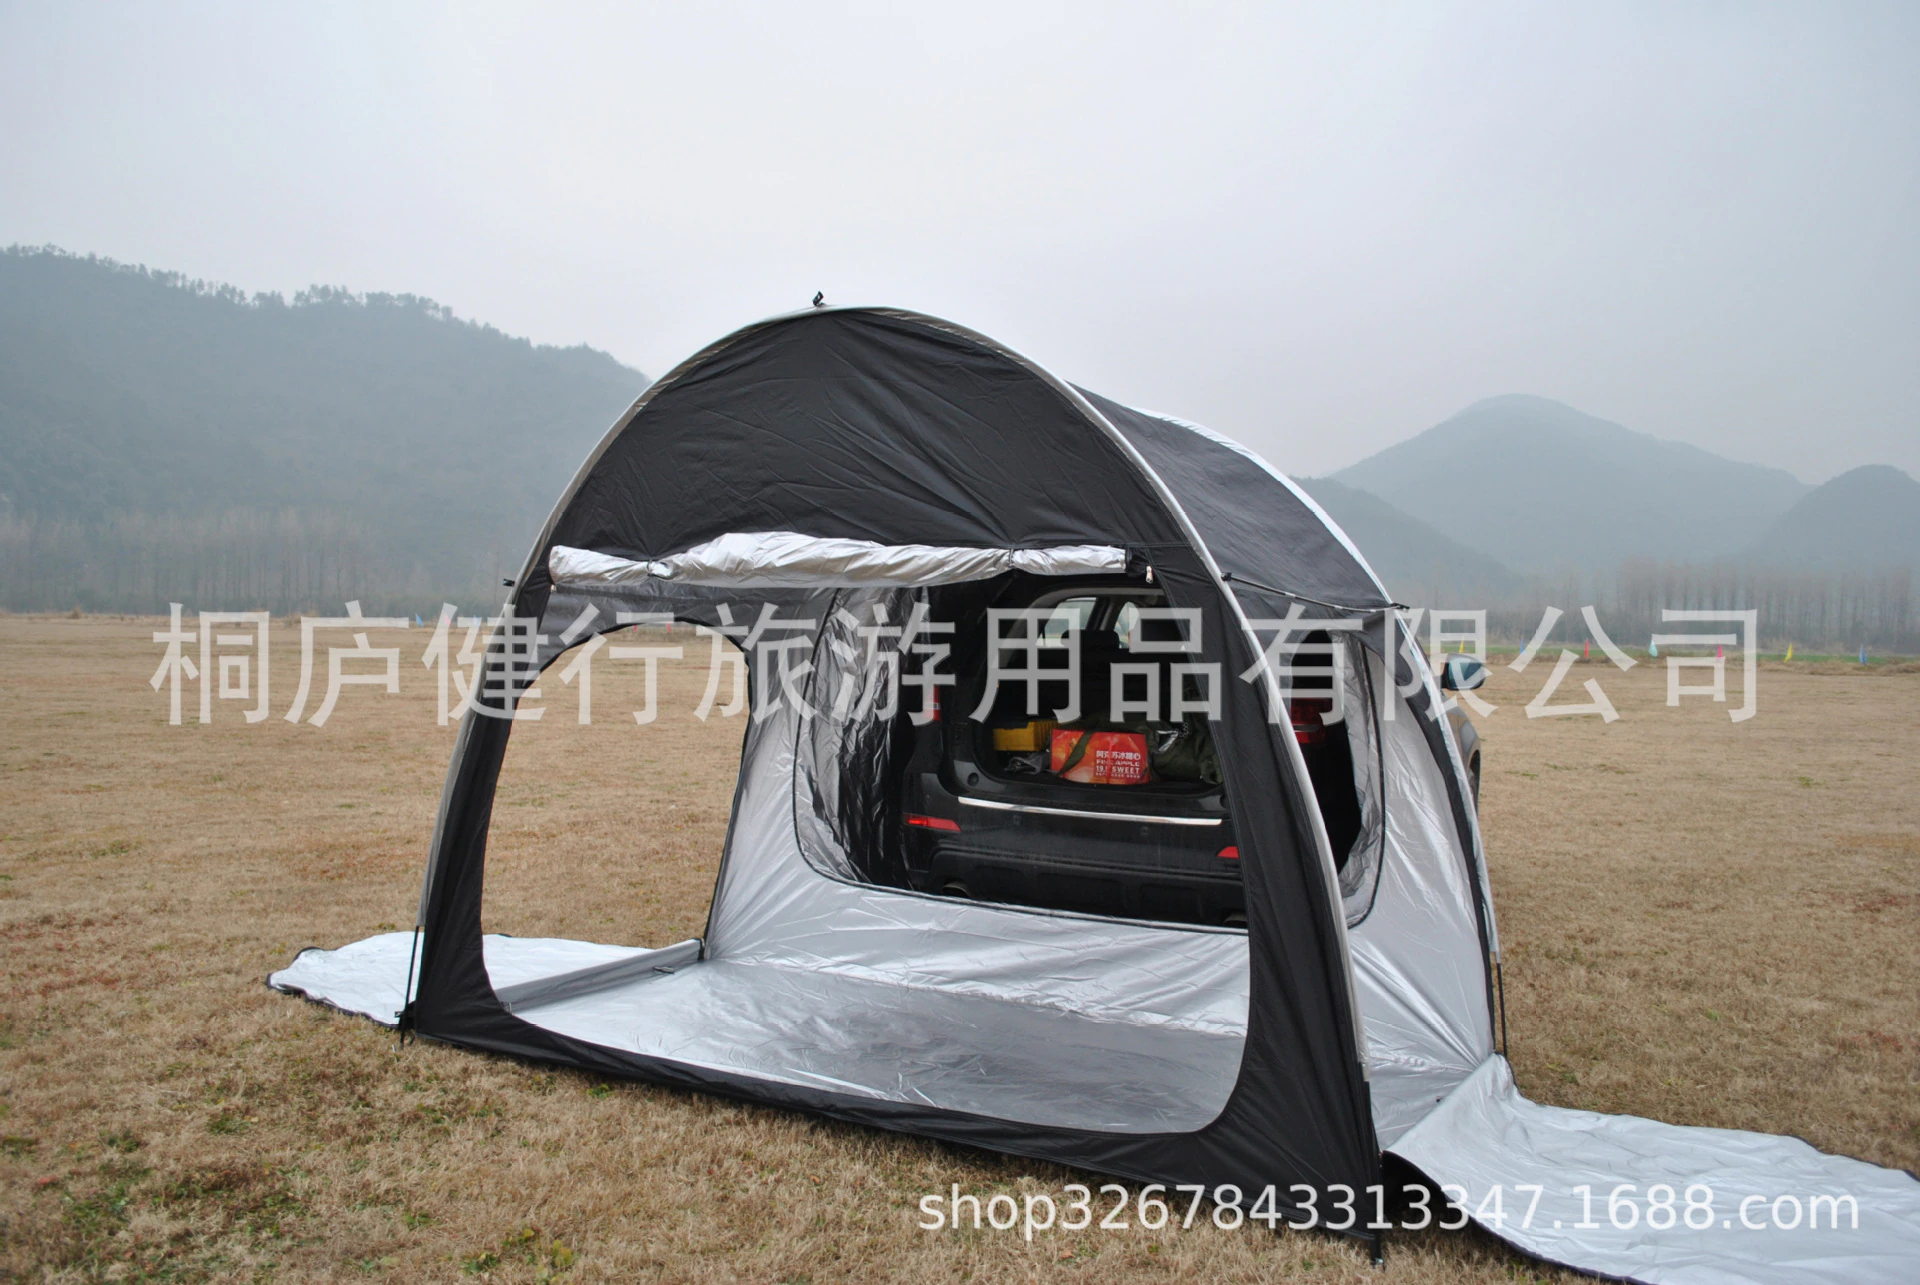 Cheap Goat Tents Outdoor Car Trunk Tent Sunshade Rainproof Tailgate Shade Awning Tent For SUV Car Self Driving Tour Barbecue Camping Tool   